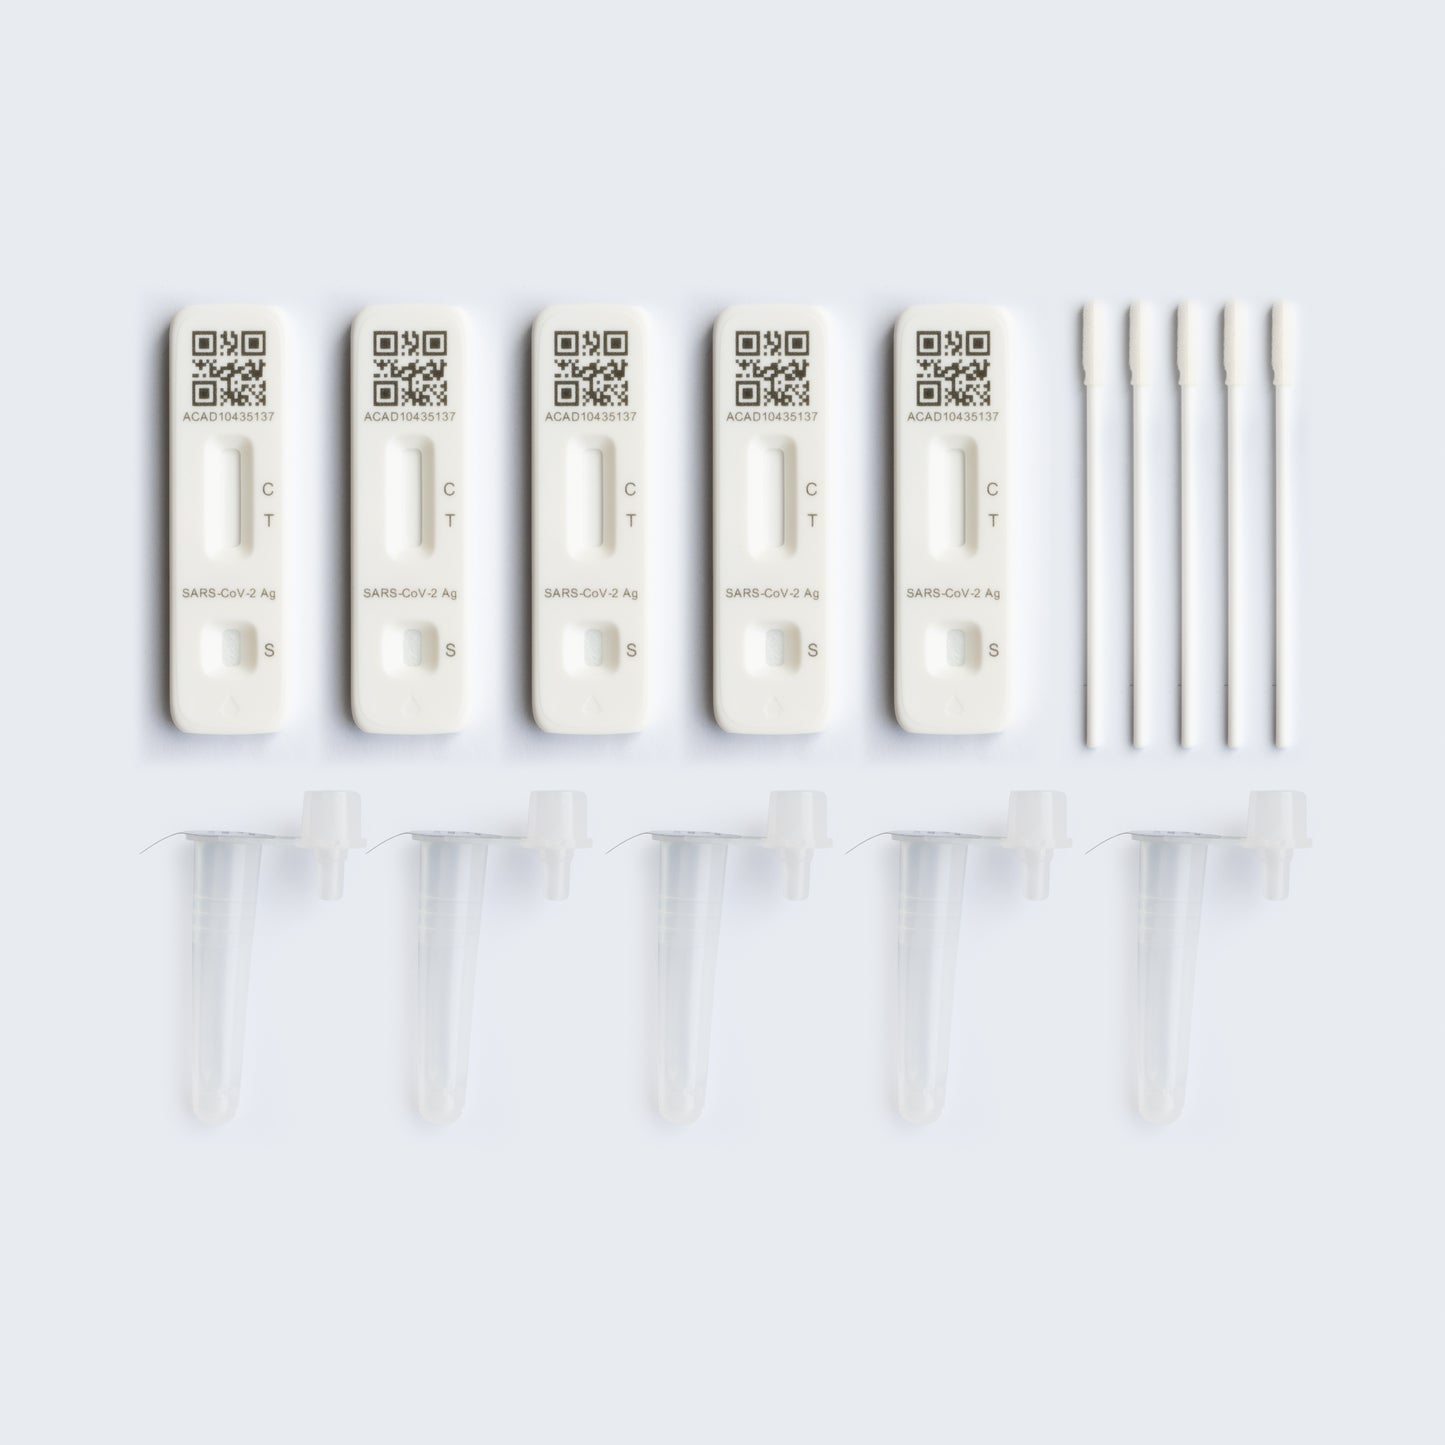 Home Use COVID-19 Lateral Flow Test Kits